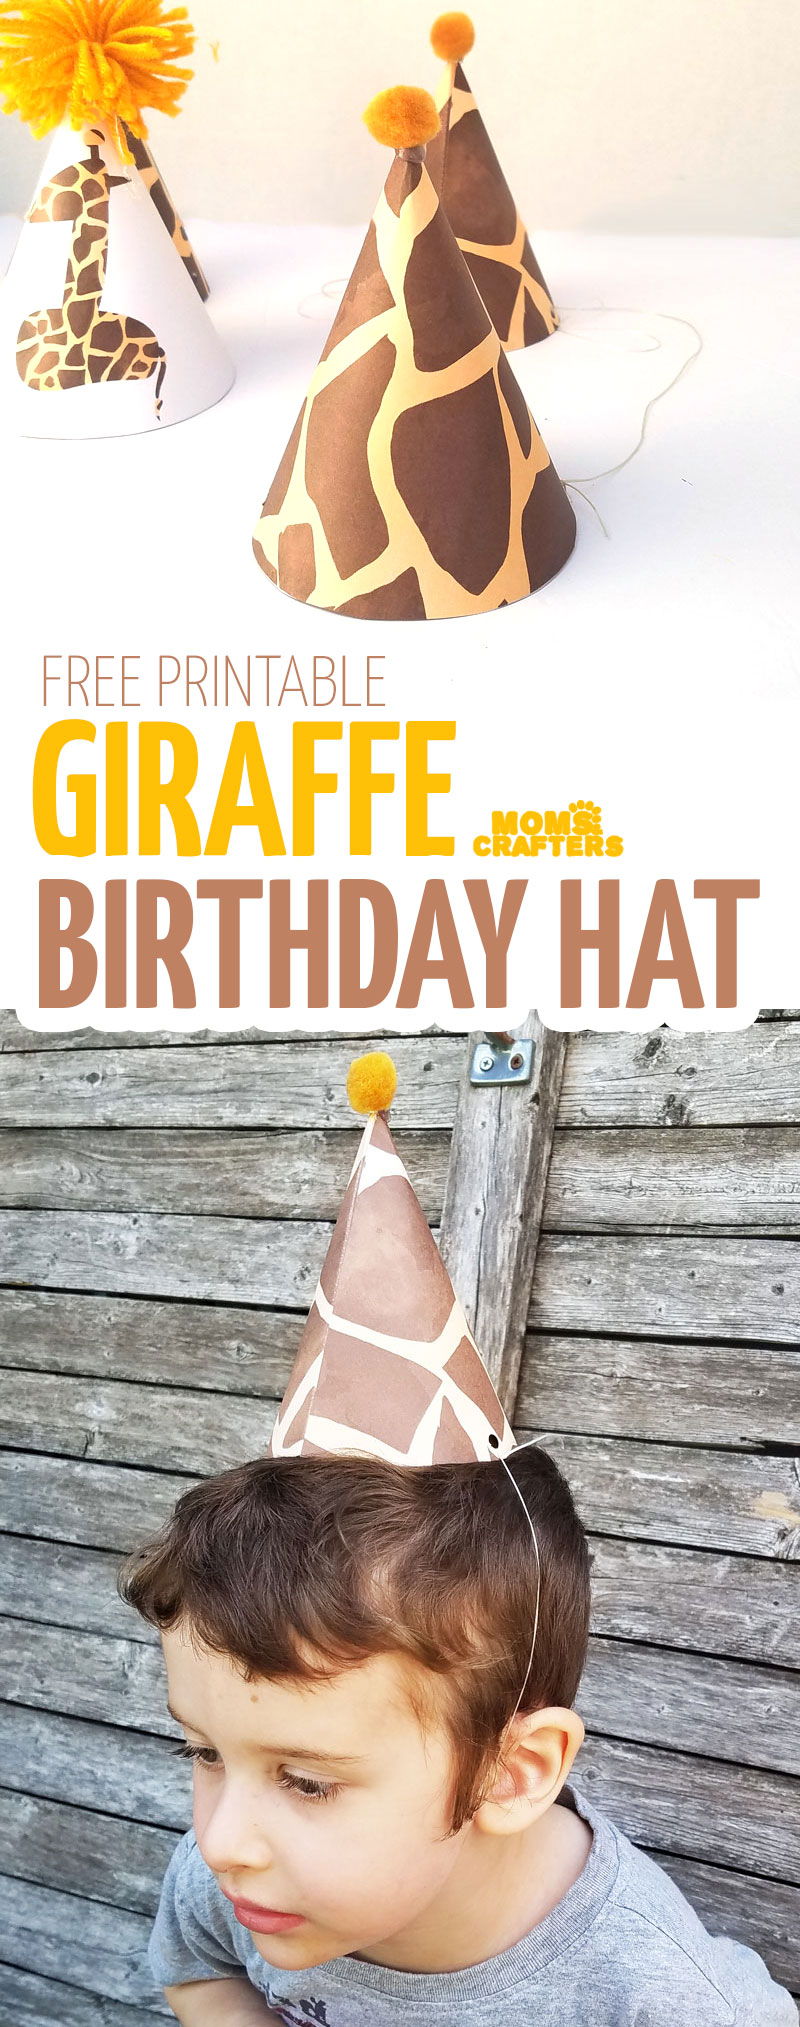 You'll love this giraffe birthday hat - including a free printable version! It's perfect for your giraffe birthday theme, or a jugle themed birthday party, or even a safari theme! It also includes a fun idea for a first birthday party theme for boys. 